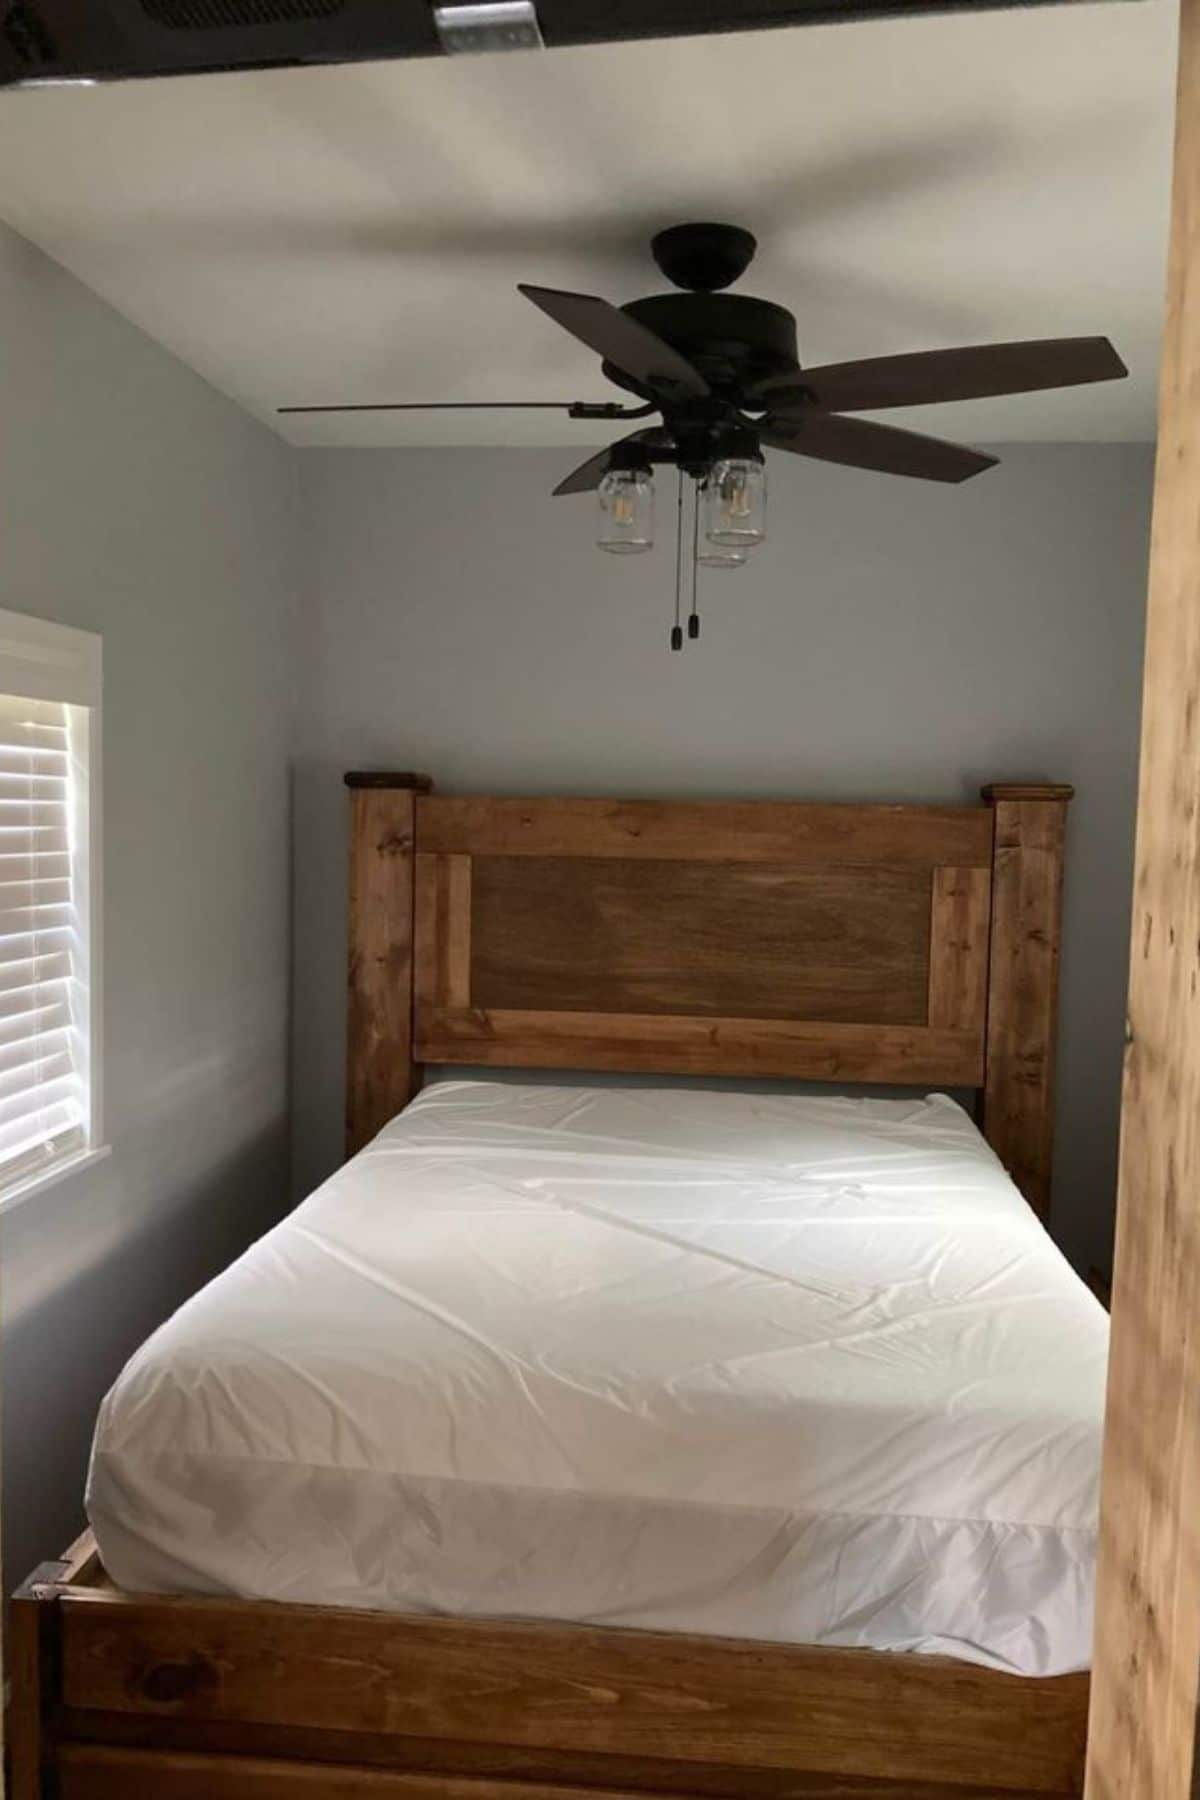 Wooden headboard on bed in room with gray walls and ceiling fan